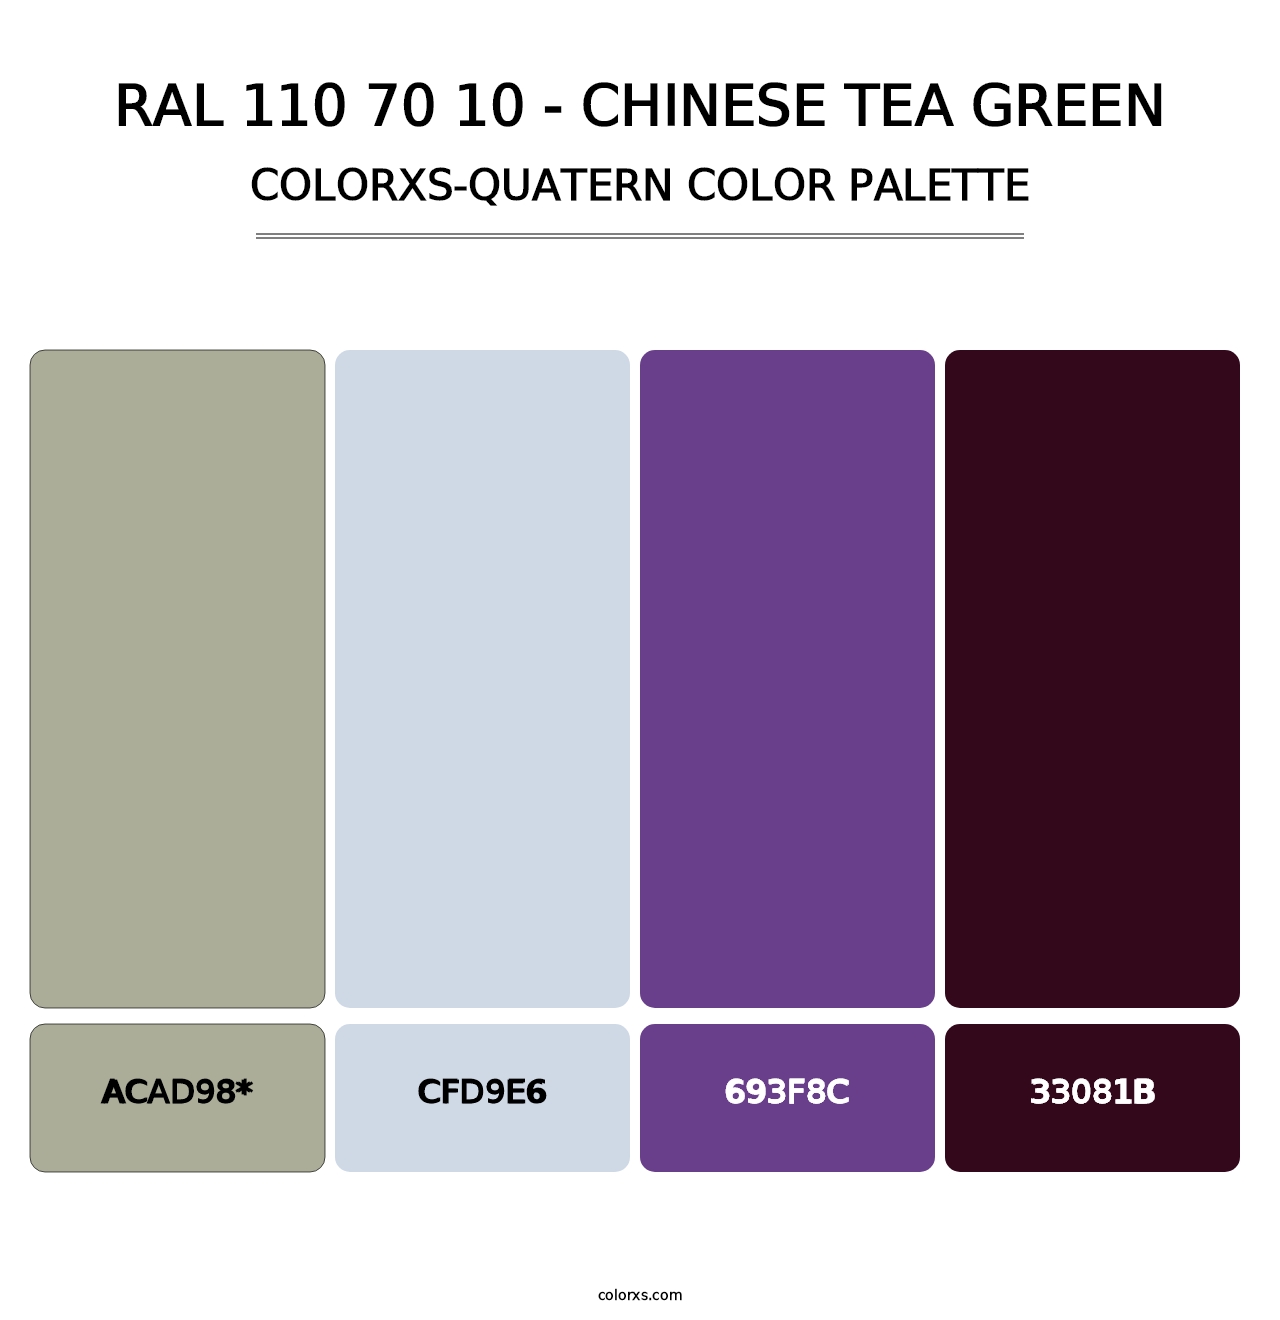 RAL 110 70 10 - Chinese Tea Green - Colorxs Quatern Palette